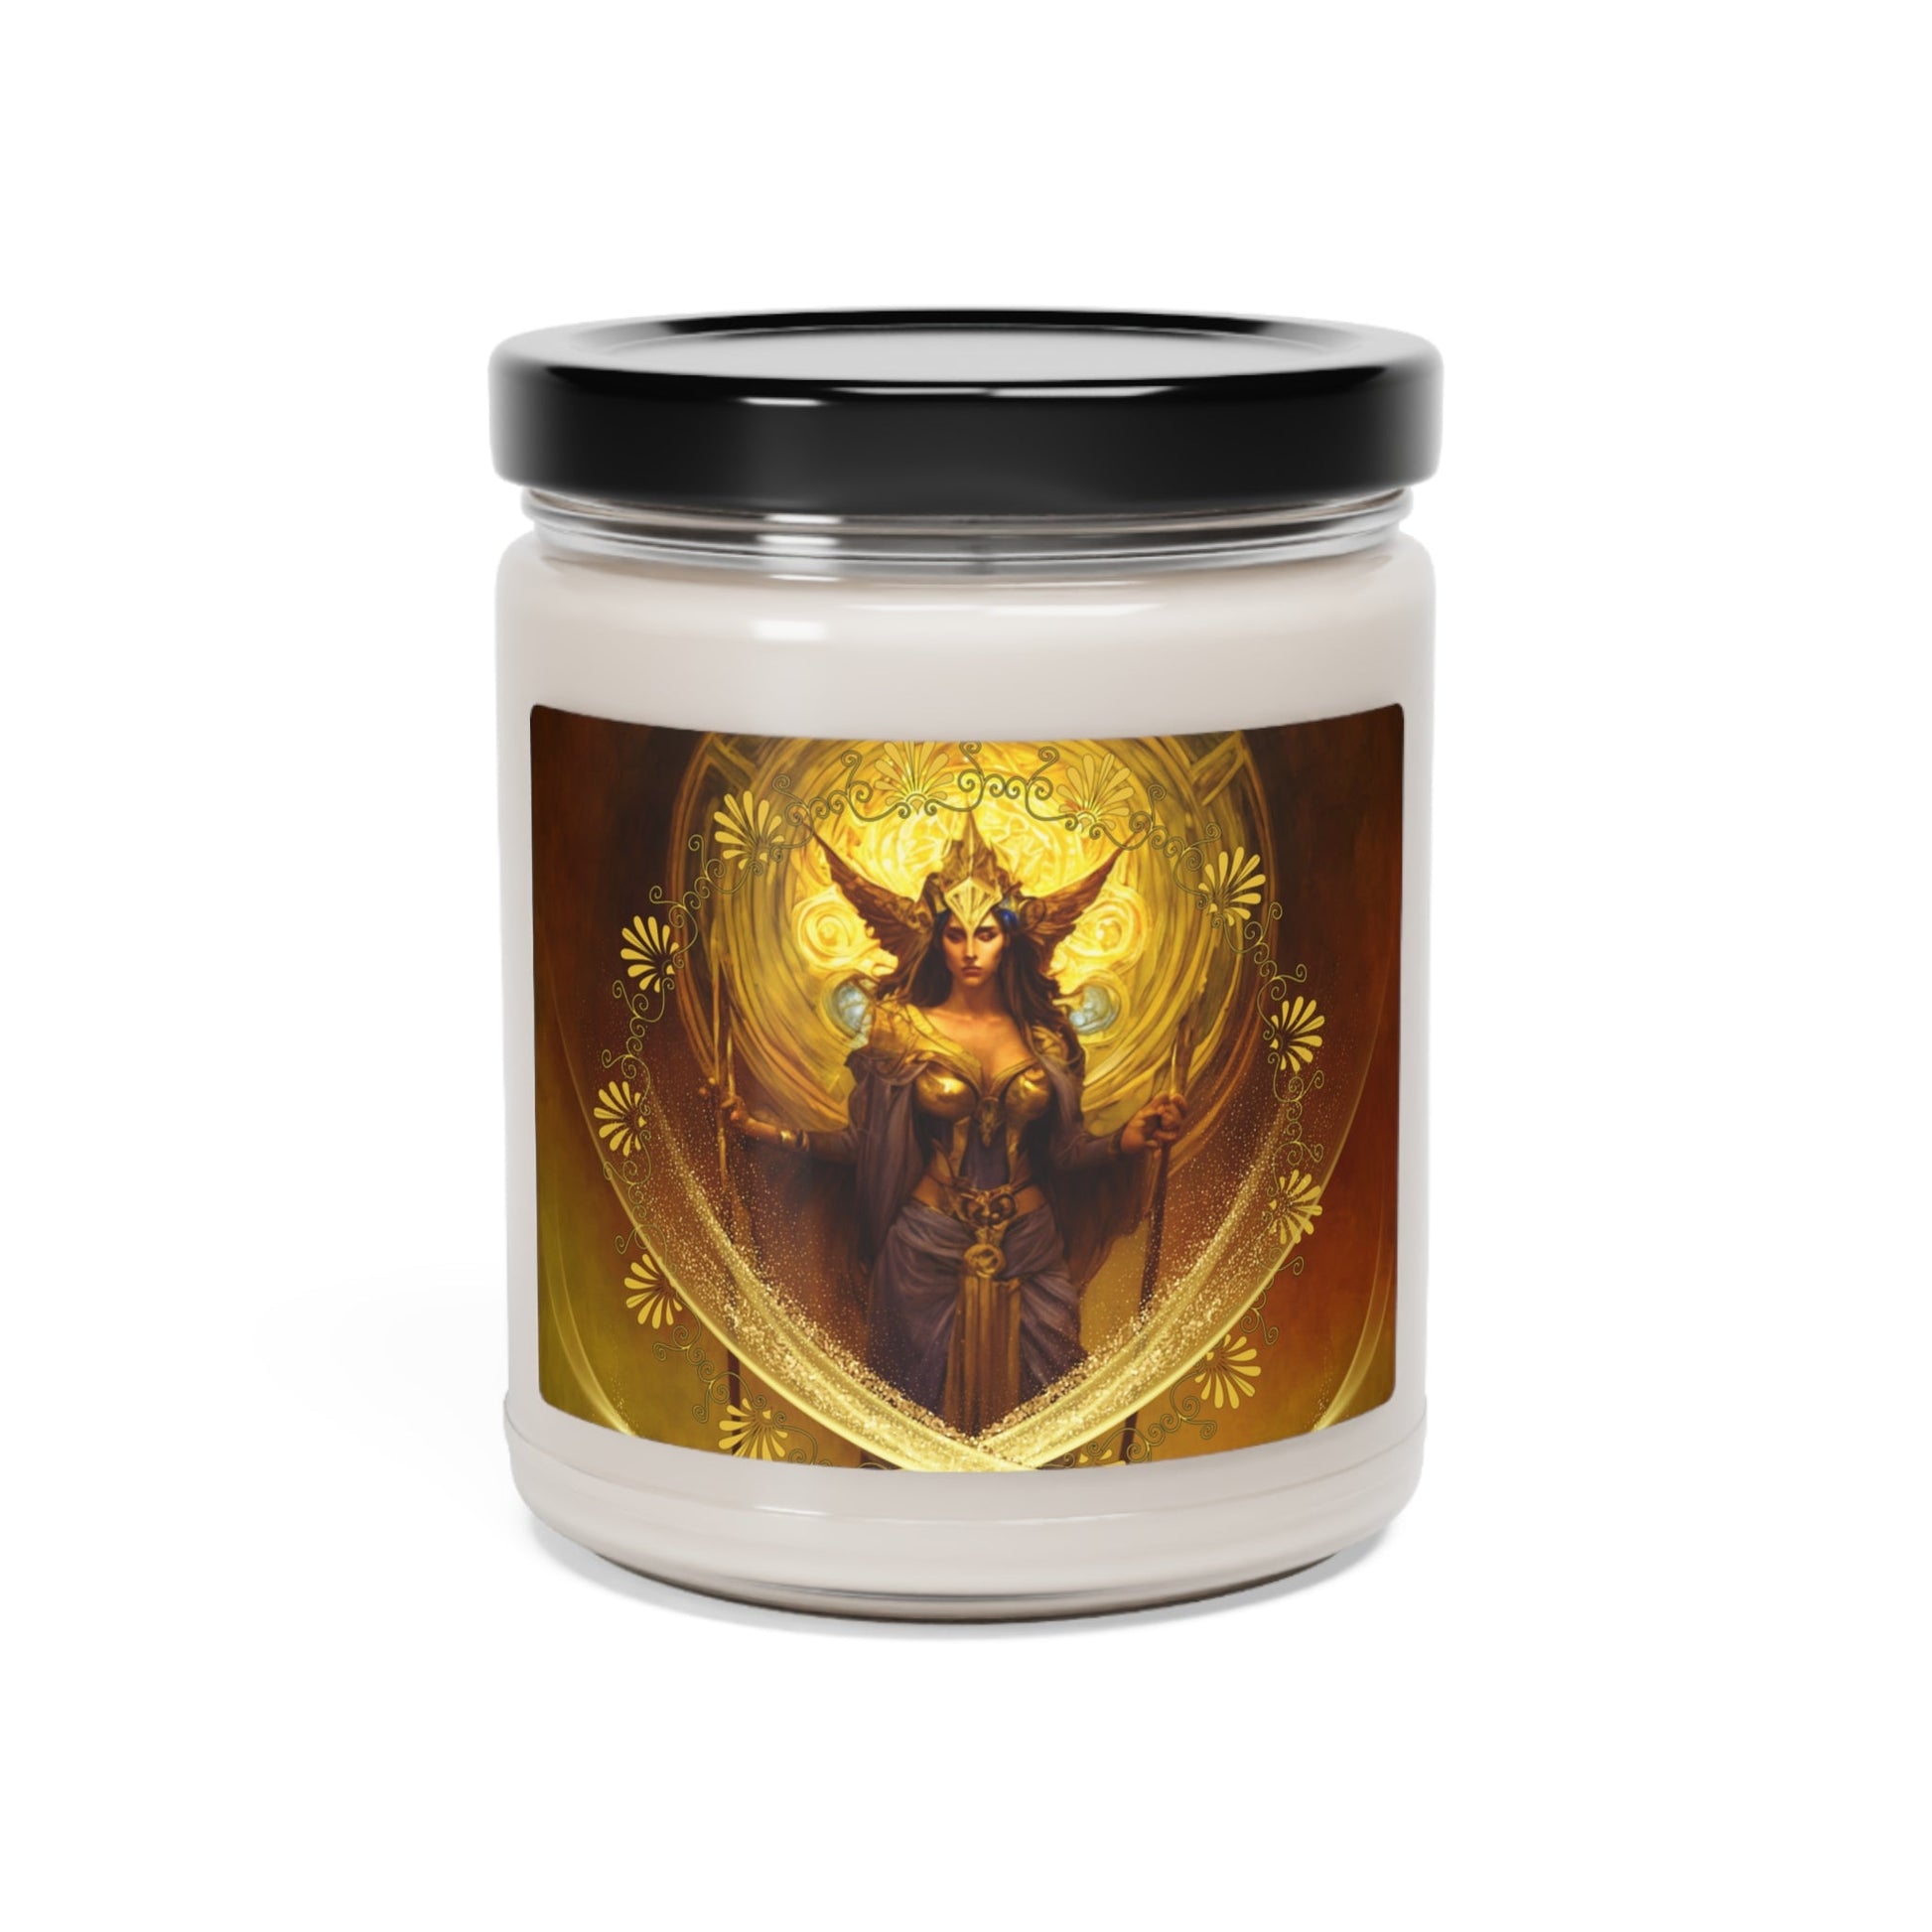 Goddess-Hecate-Scented-Soy-Candle-for-offerings-rituals-initiations-or-praying-and-meditation-21